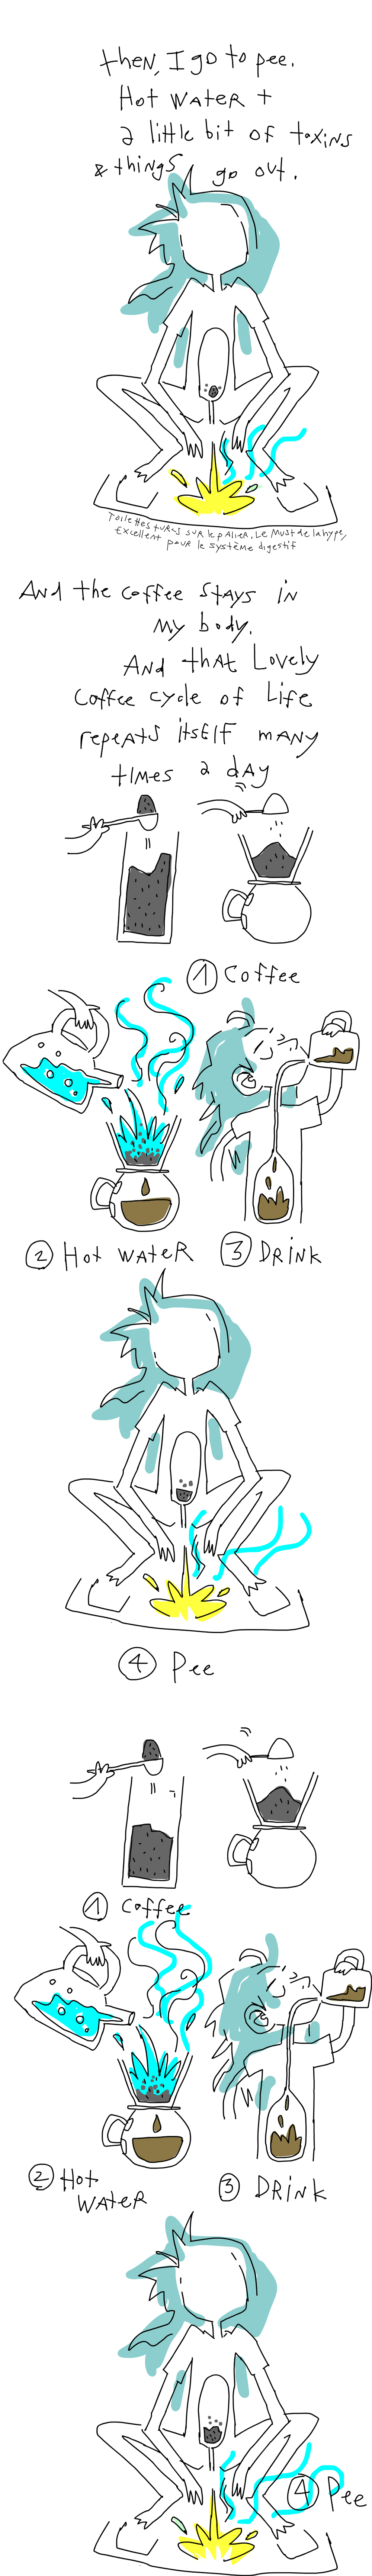 Hot water plus a little bit of toxin thingies get out my body. And the coffee stays. And that lovely cycle of coffee drinks repeats itself many times during the day. 